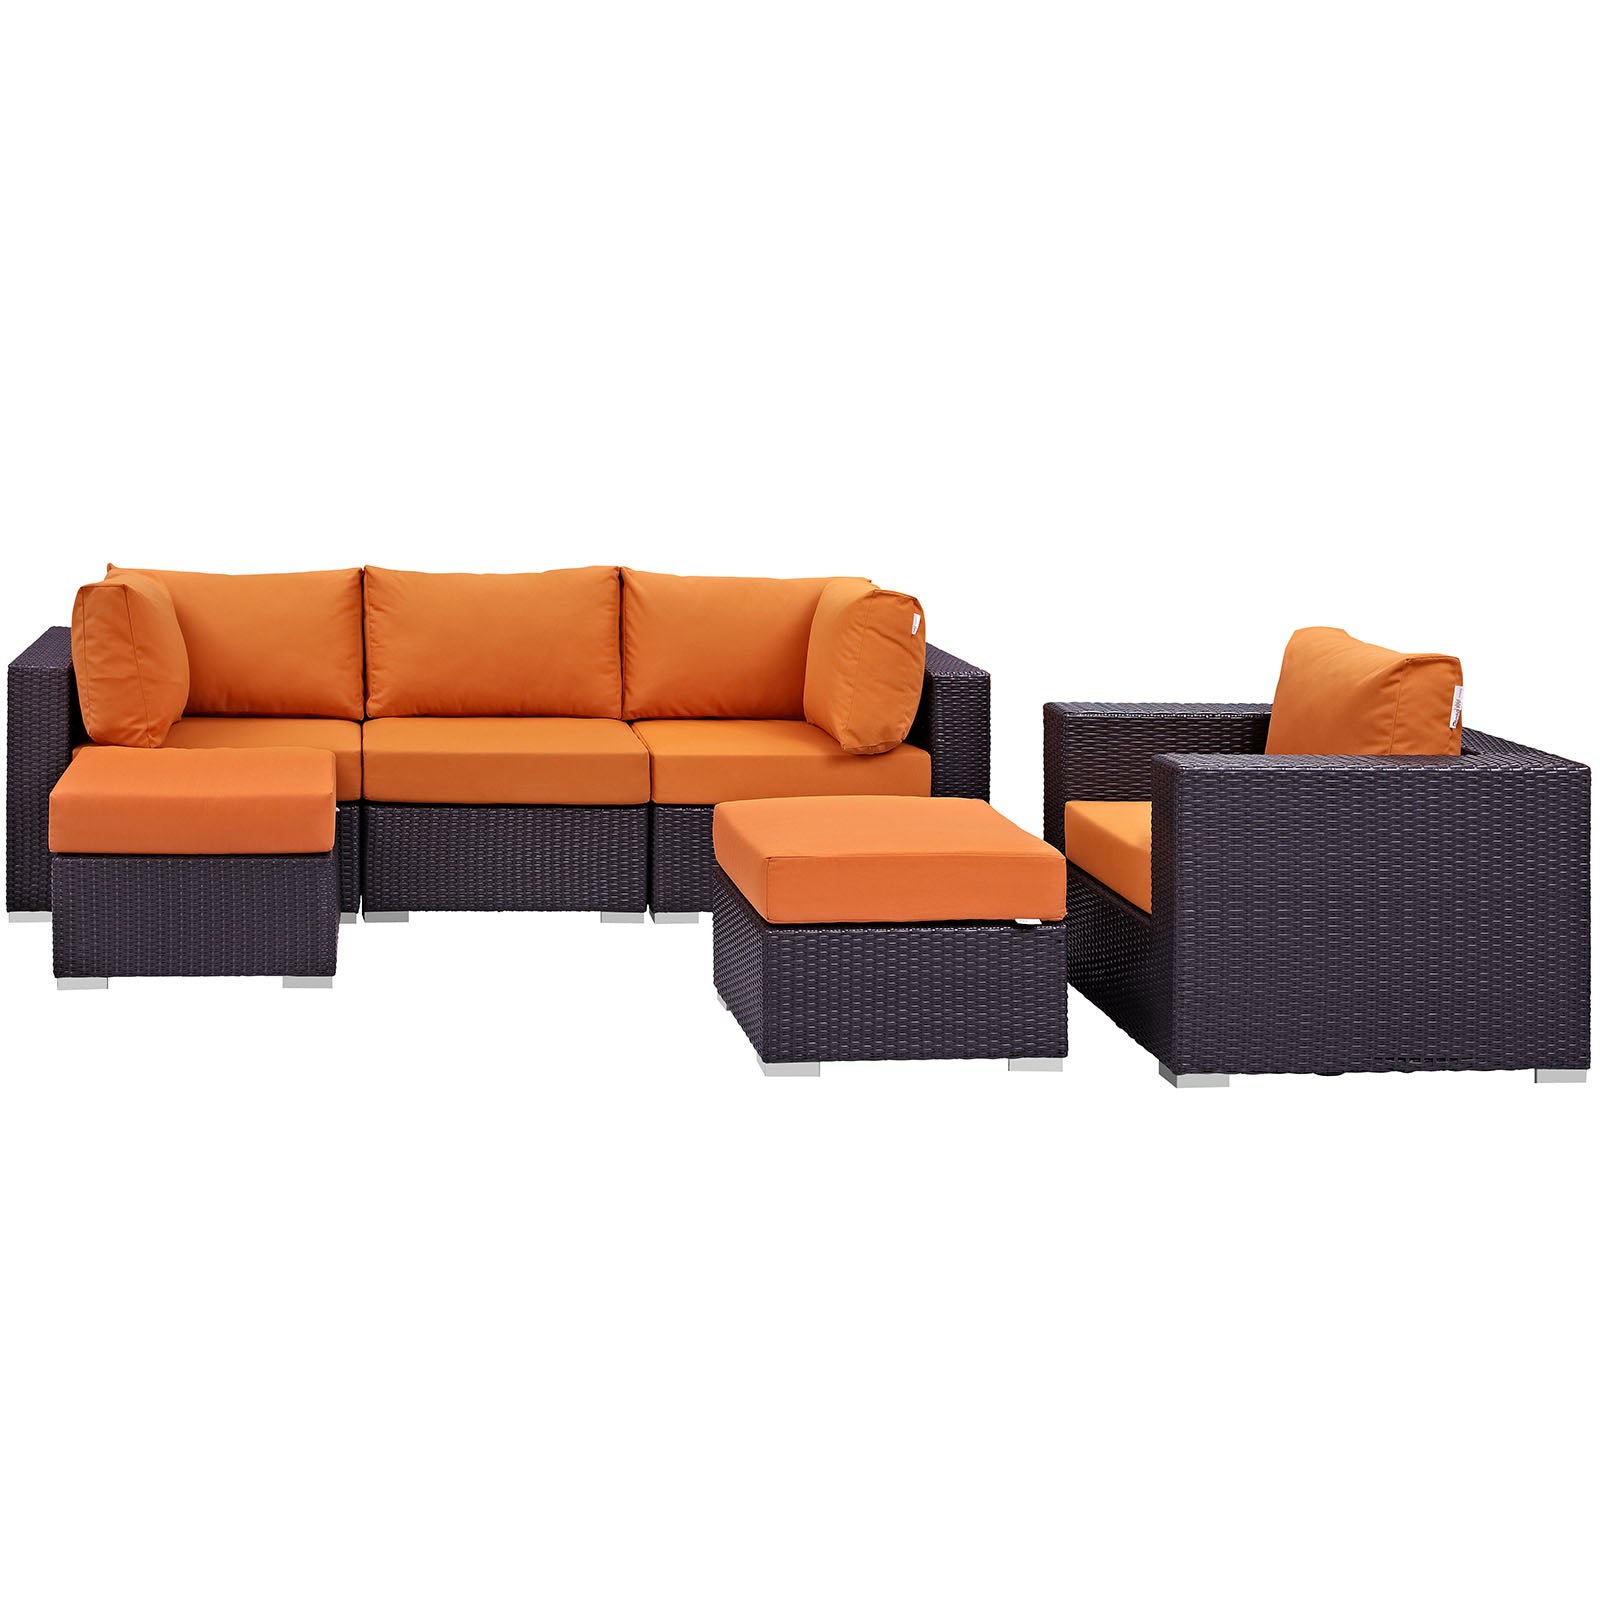 Convene 6 Piece Outdoor Patio Sectional Set-Outdoor Set-Modway-Wall2Wall Furnishings